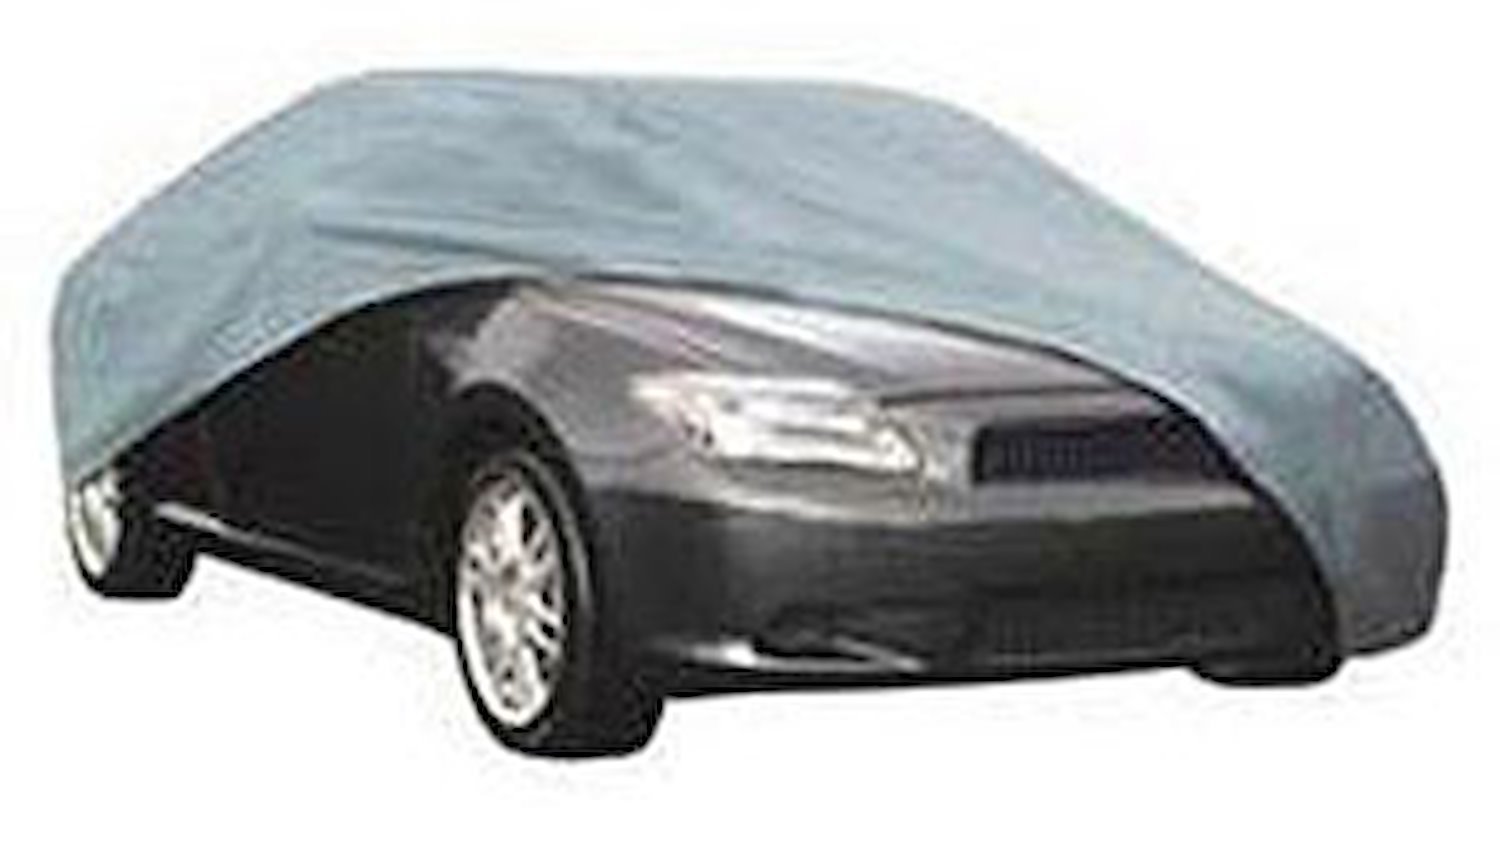 Budge Lite Car Cover Fits Cars Up To 16" 8" in Length